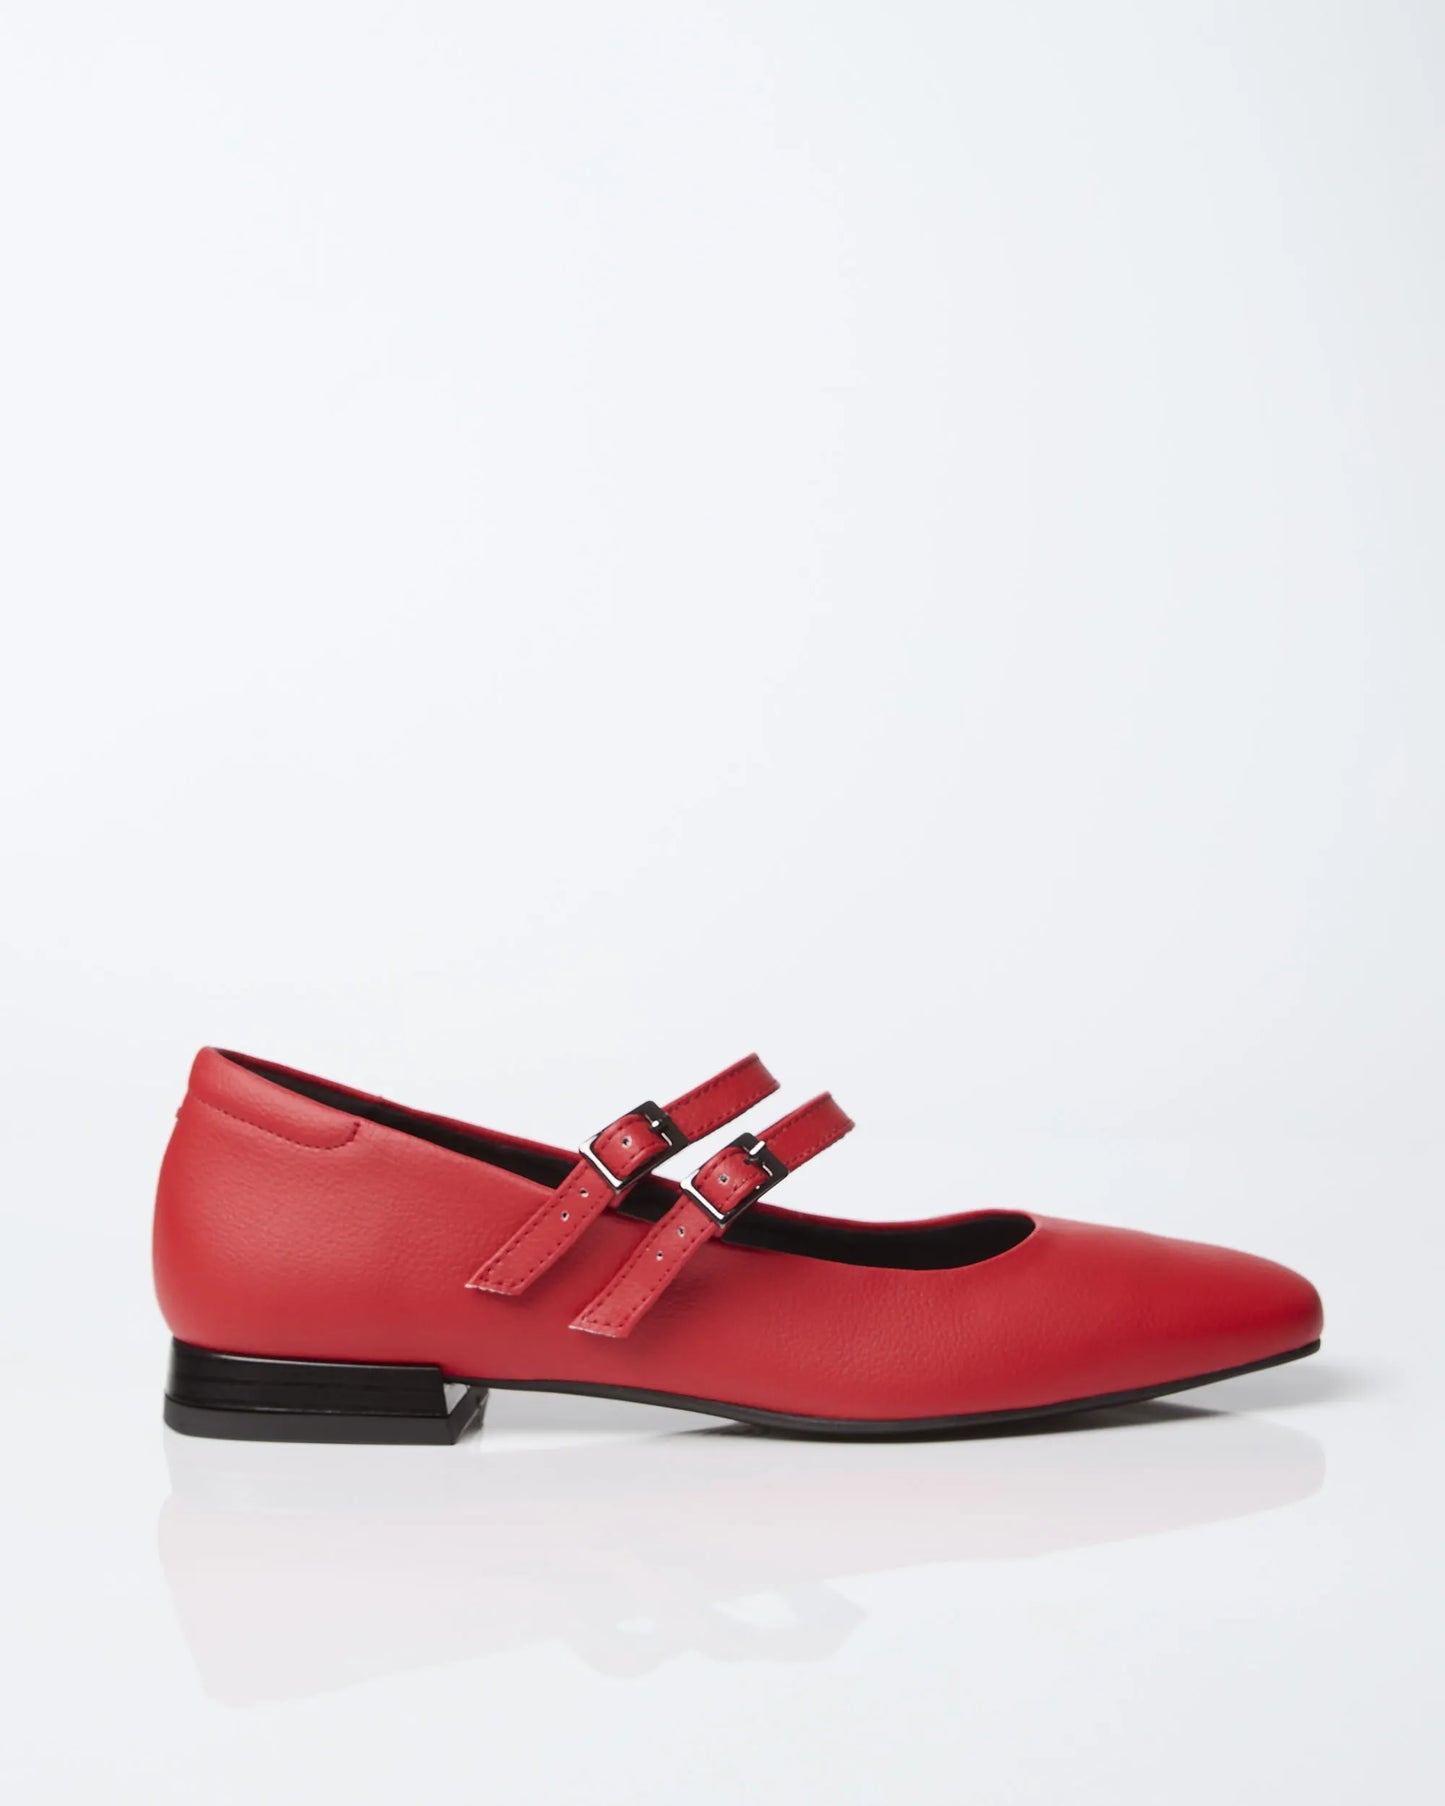 Strawberry Mary Jane Pumps red pumps made of grape-based vegan leather